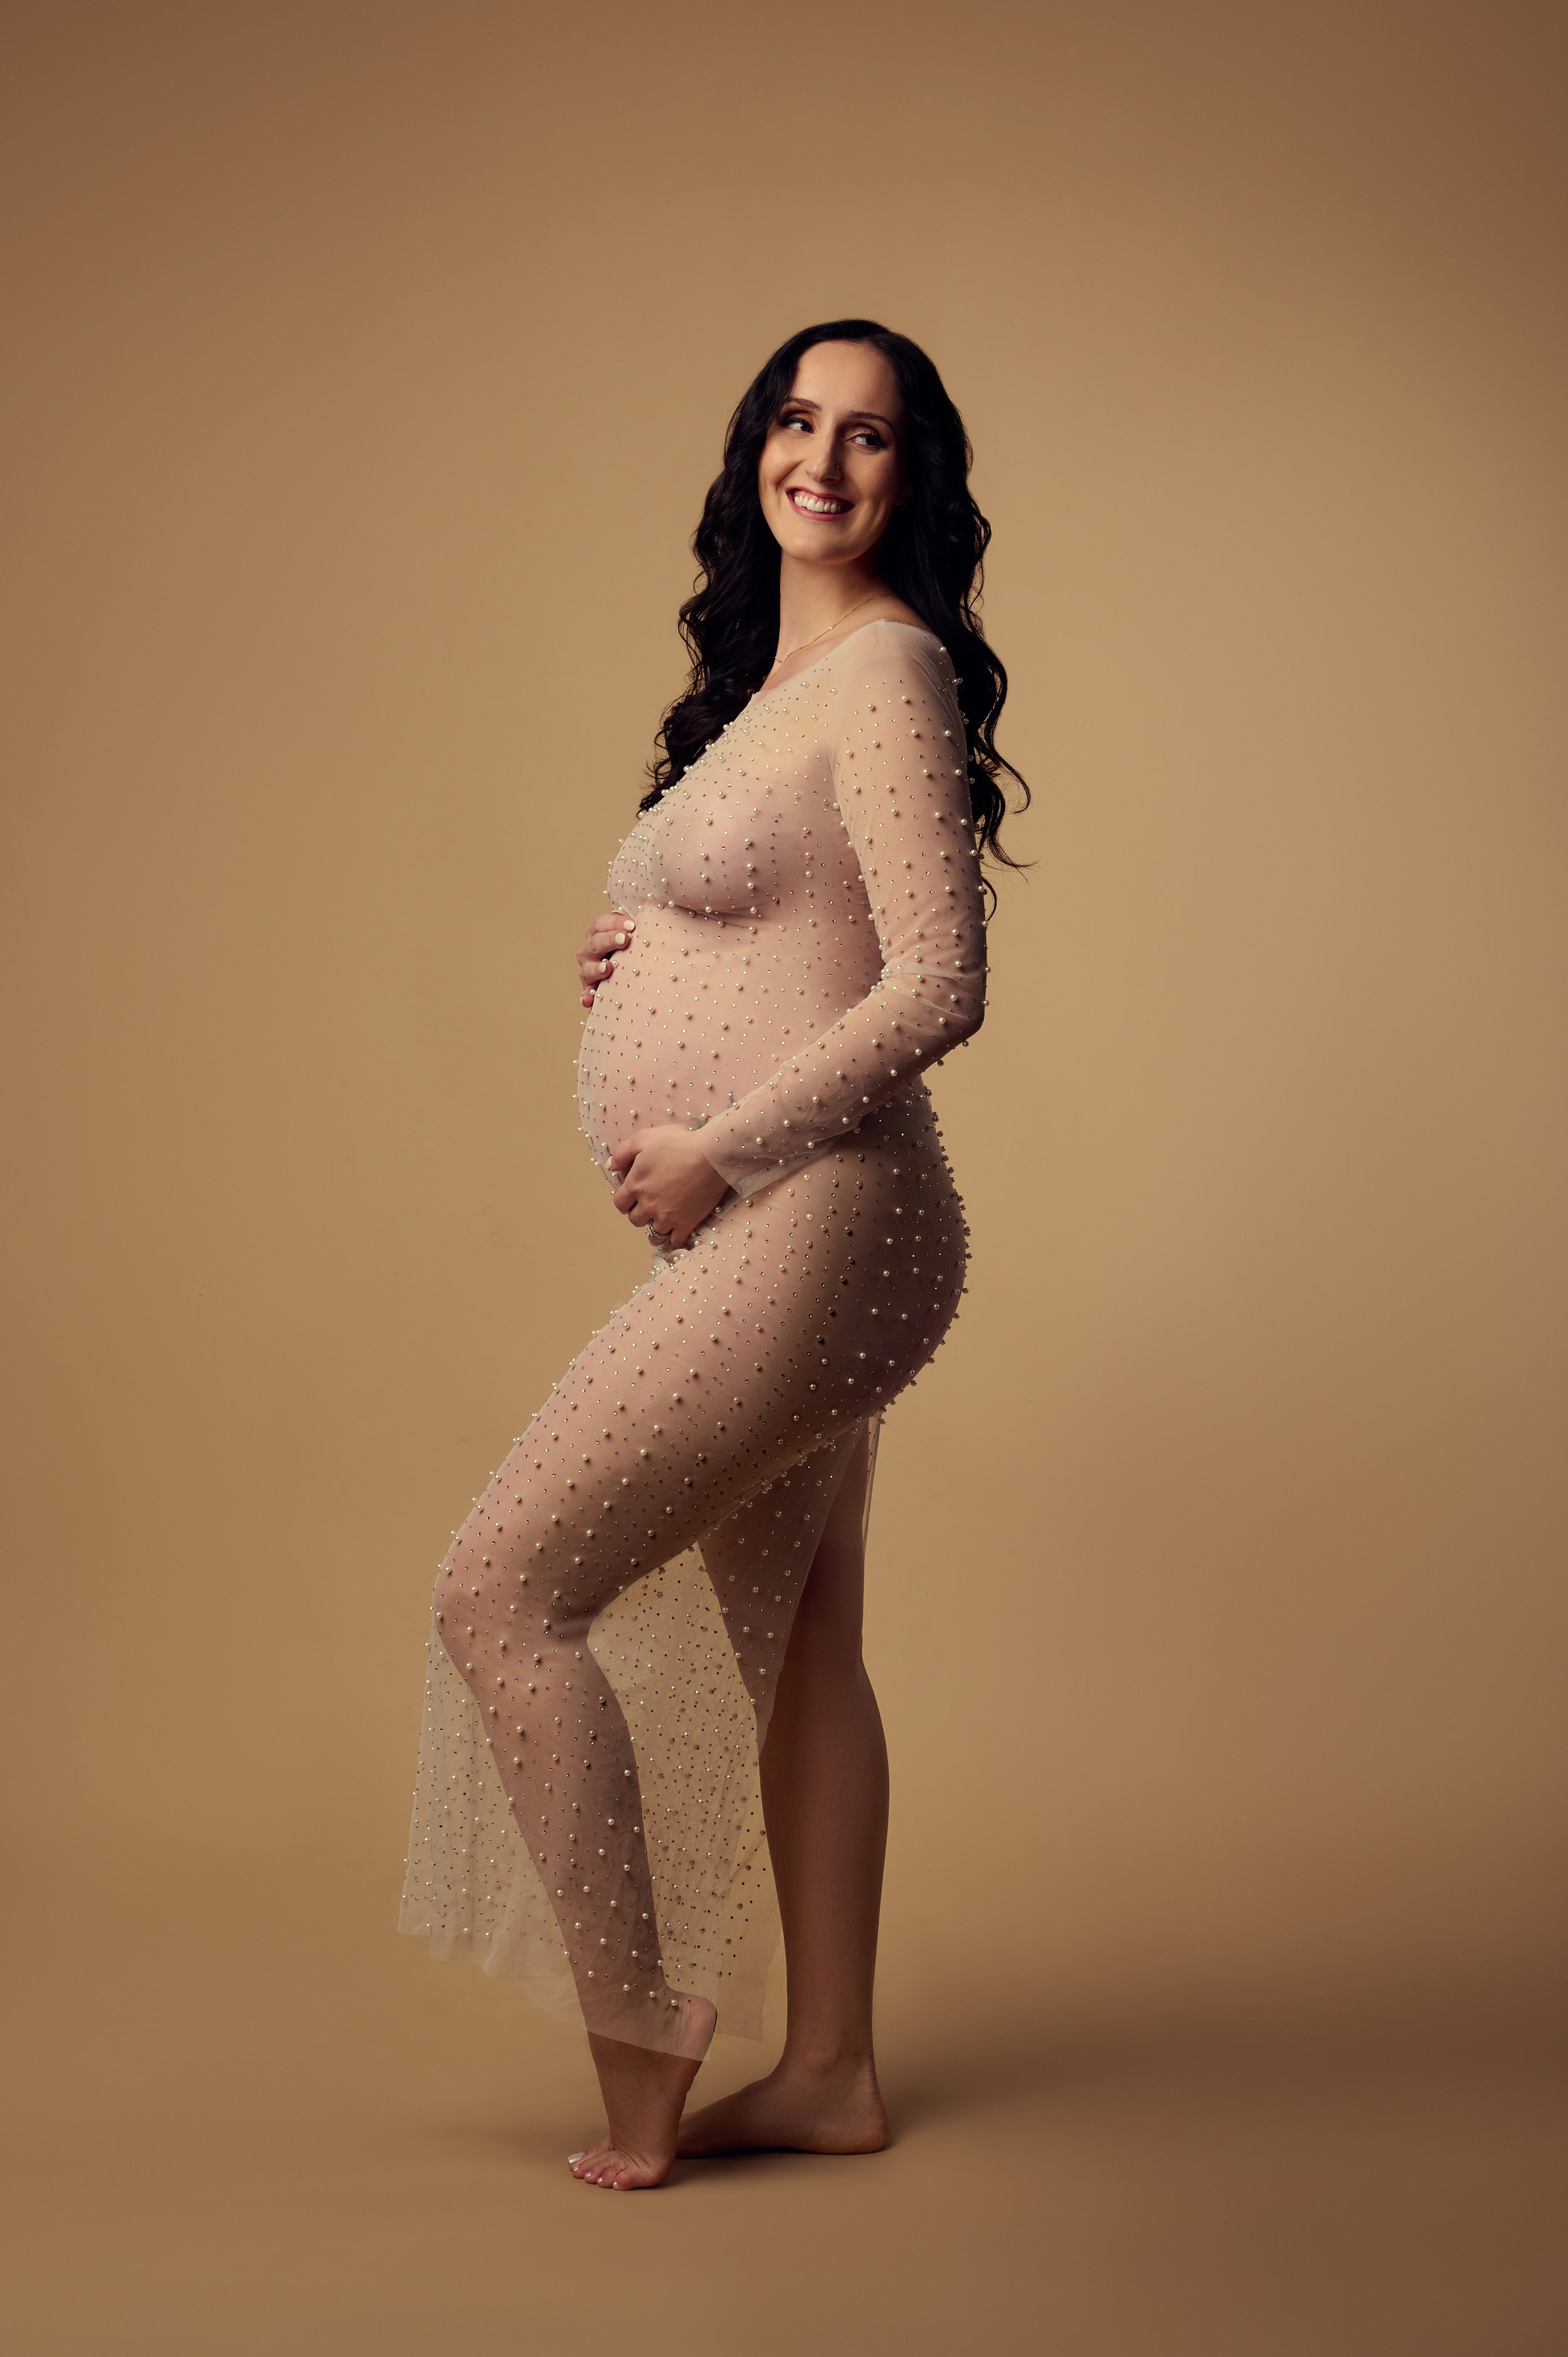 pregnant woman in pearl gown with tan background.jpg